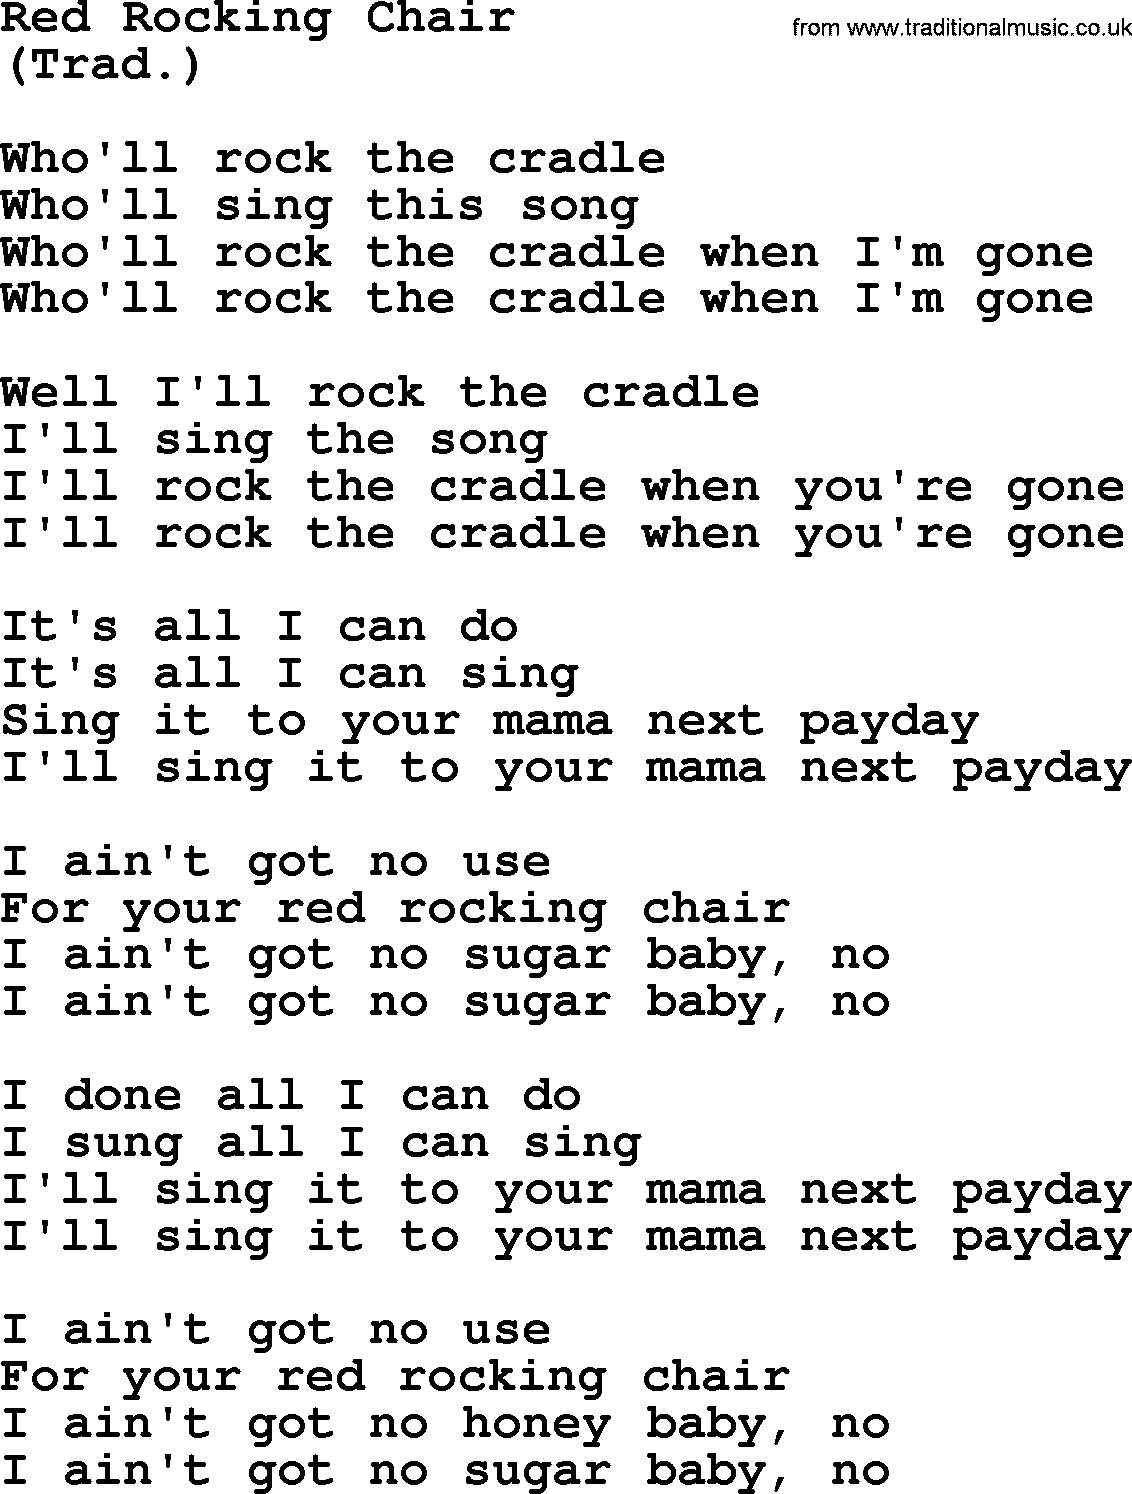 The Byrds song Red Rocking Chair, lyrics